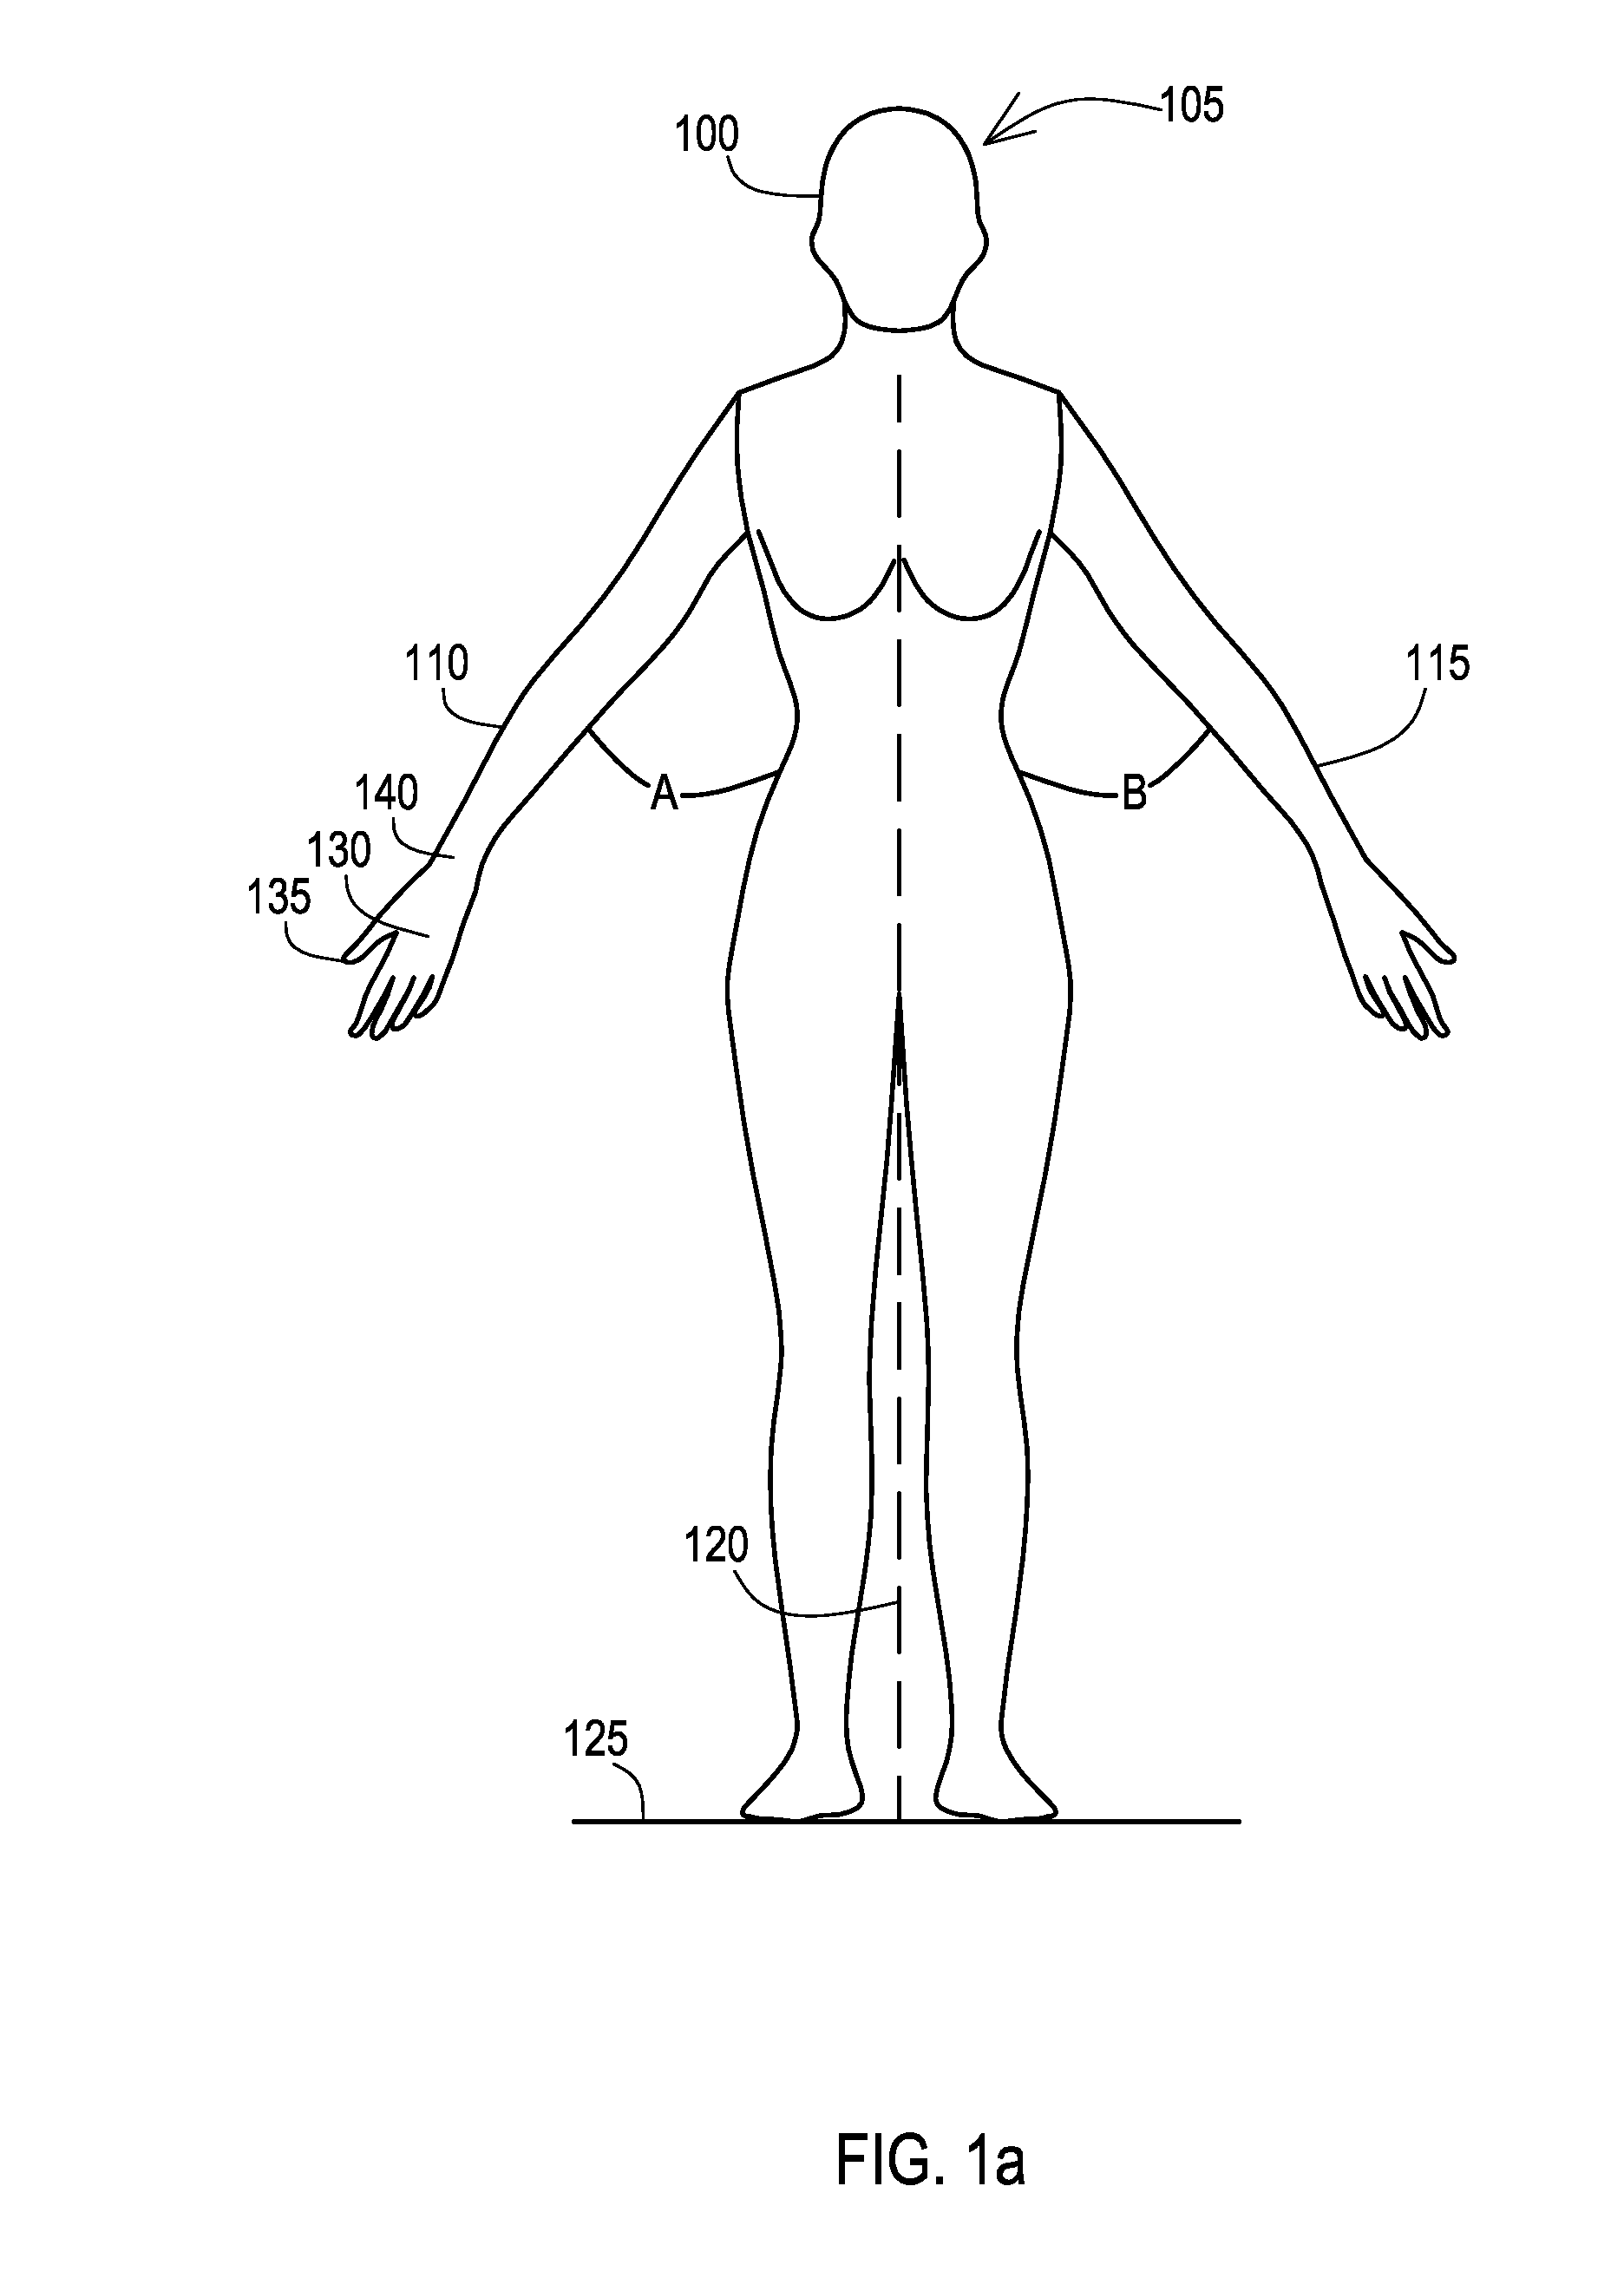 Methods for detecting, monitoring and treating lymphedema